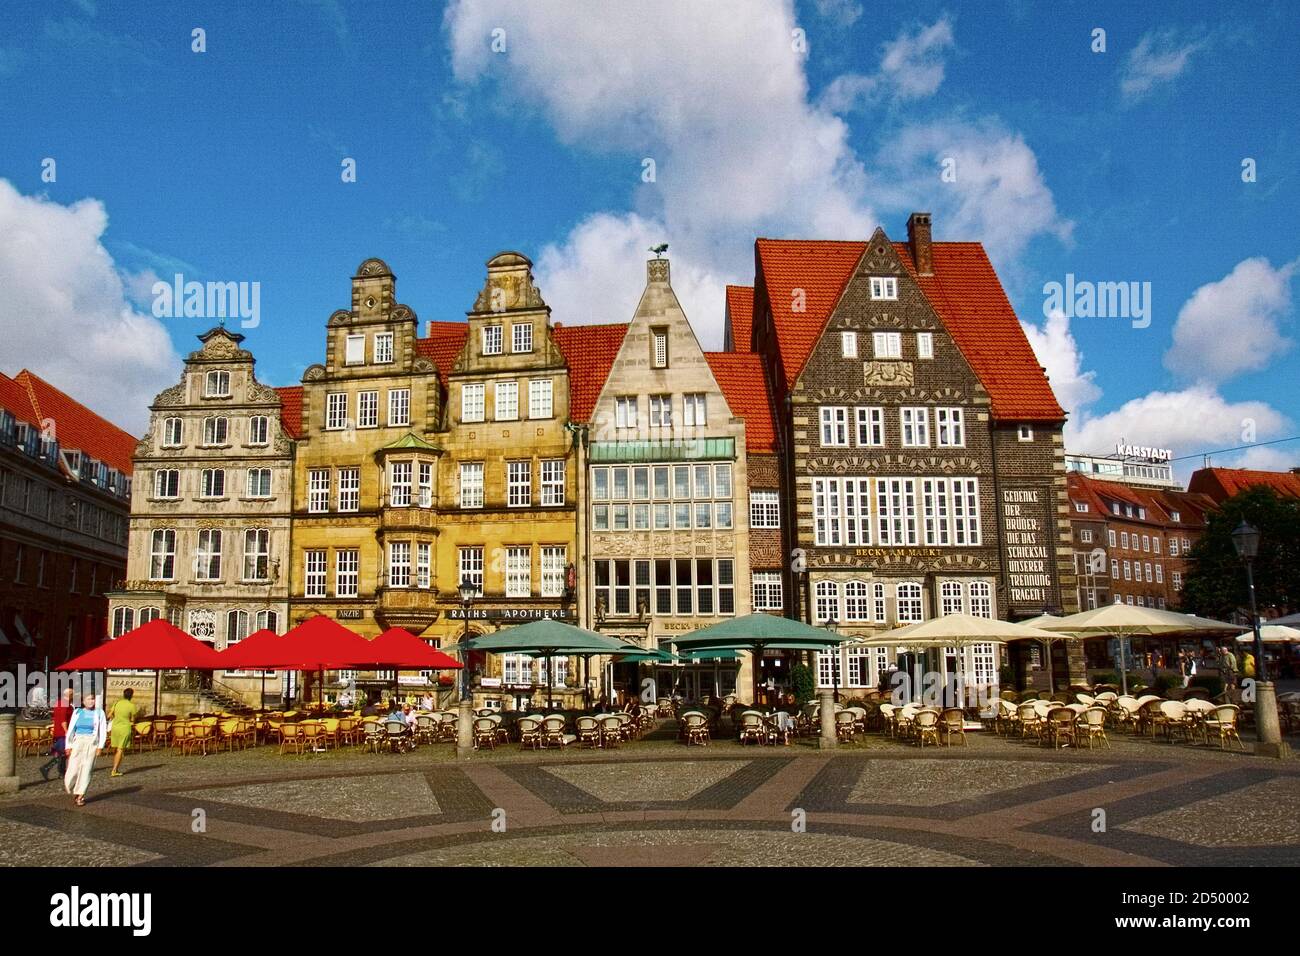 historic merchants' houses at the old market, HDR-Image, Germany, Bremen Stock Photo